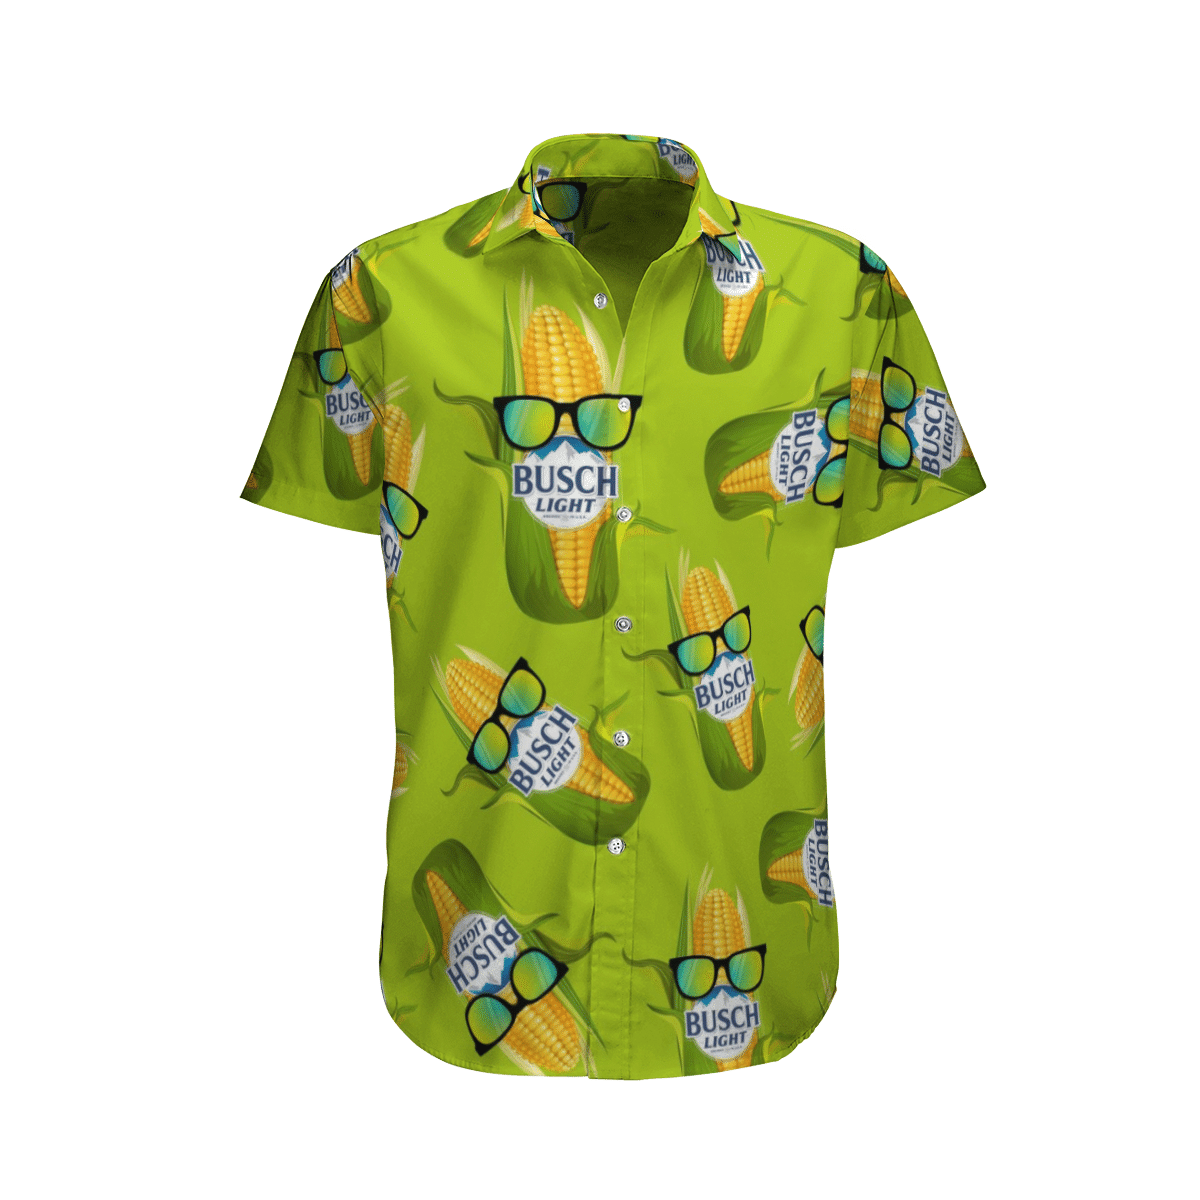 Top cool Hawaiian shirt 2022 - Make sure you get yours today before they run out! 18